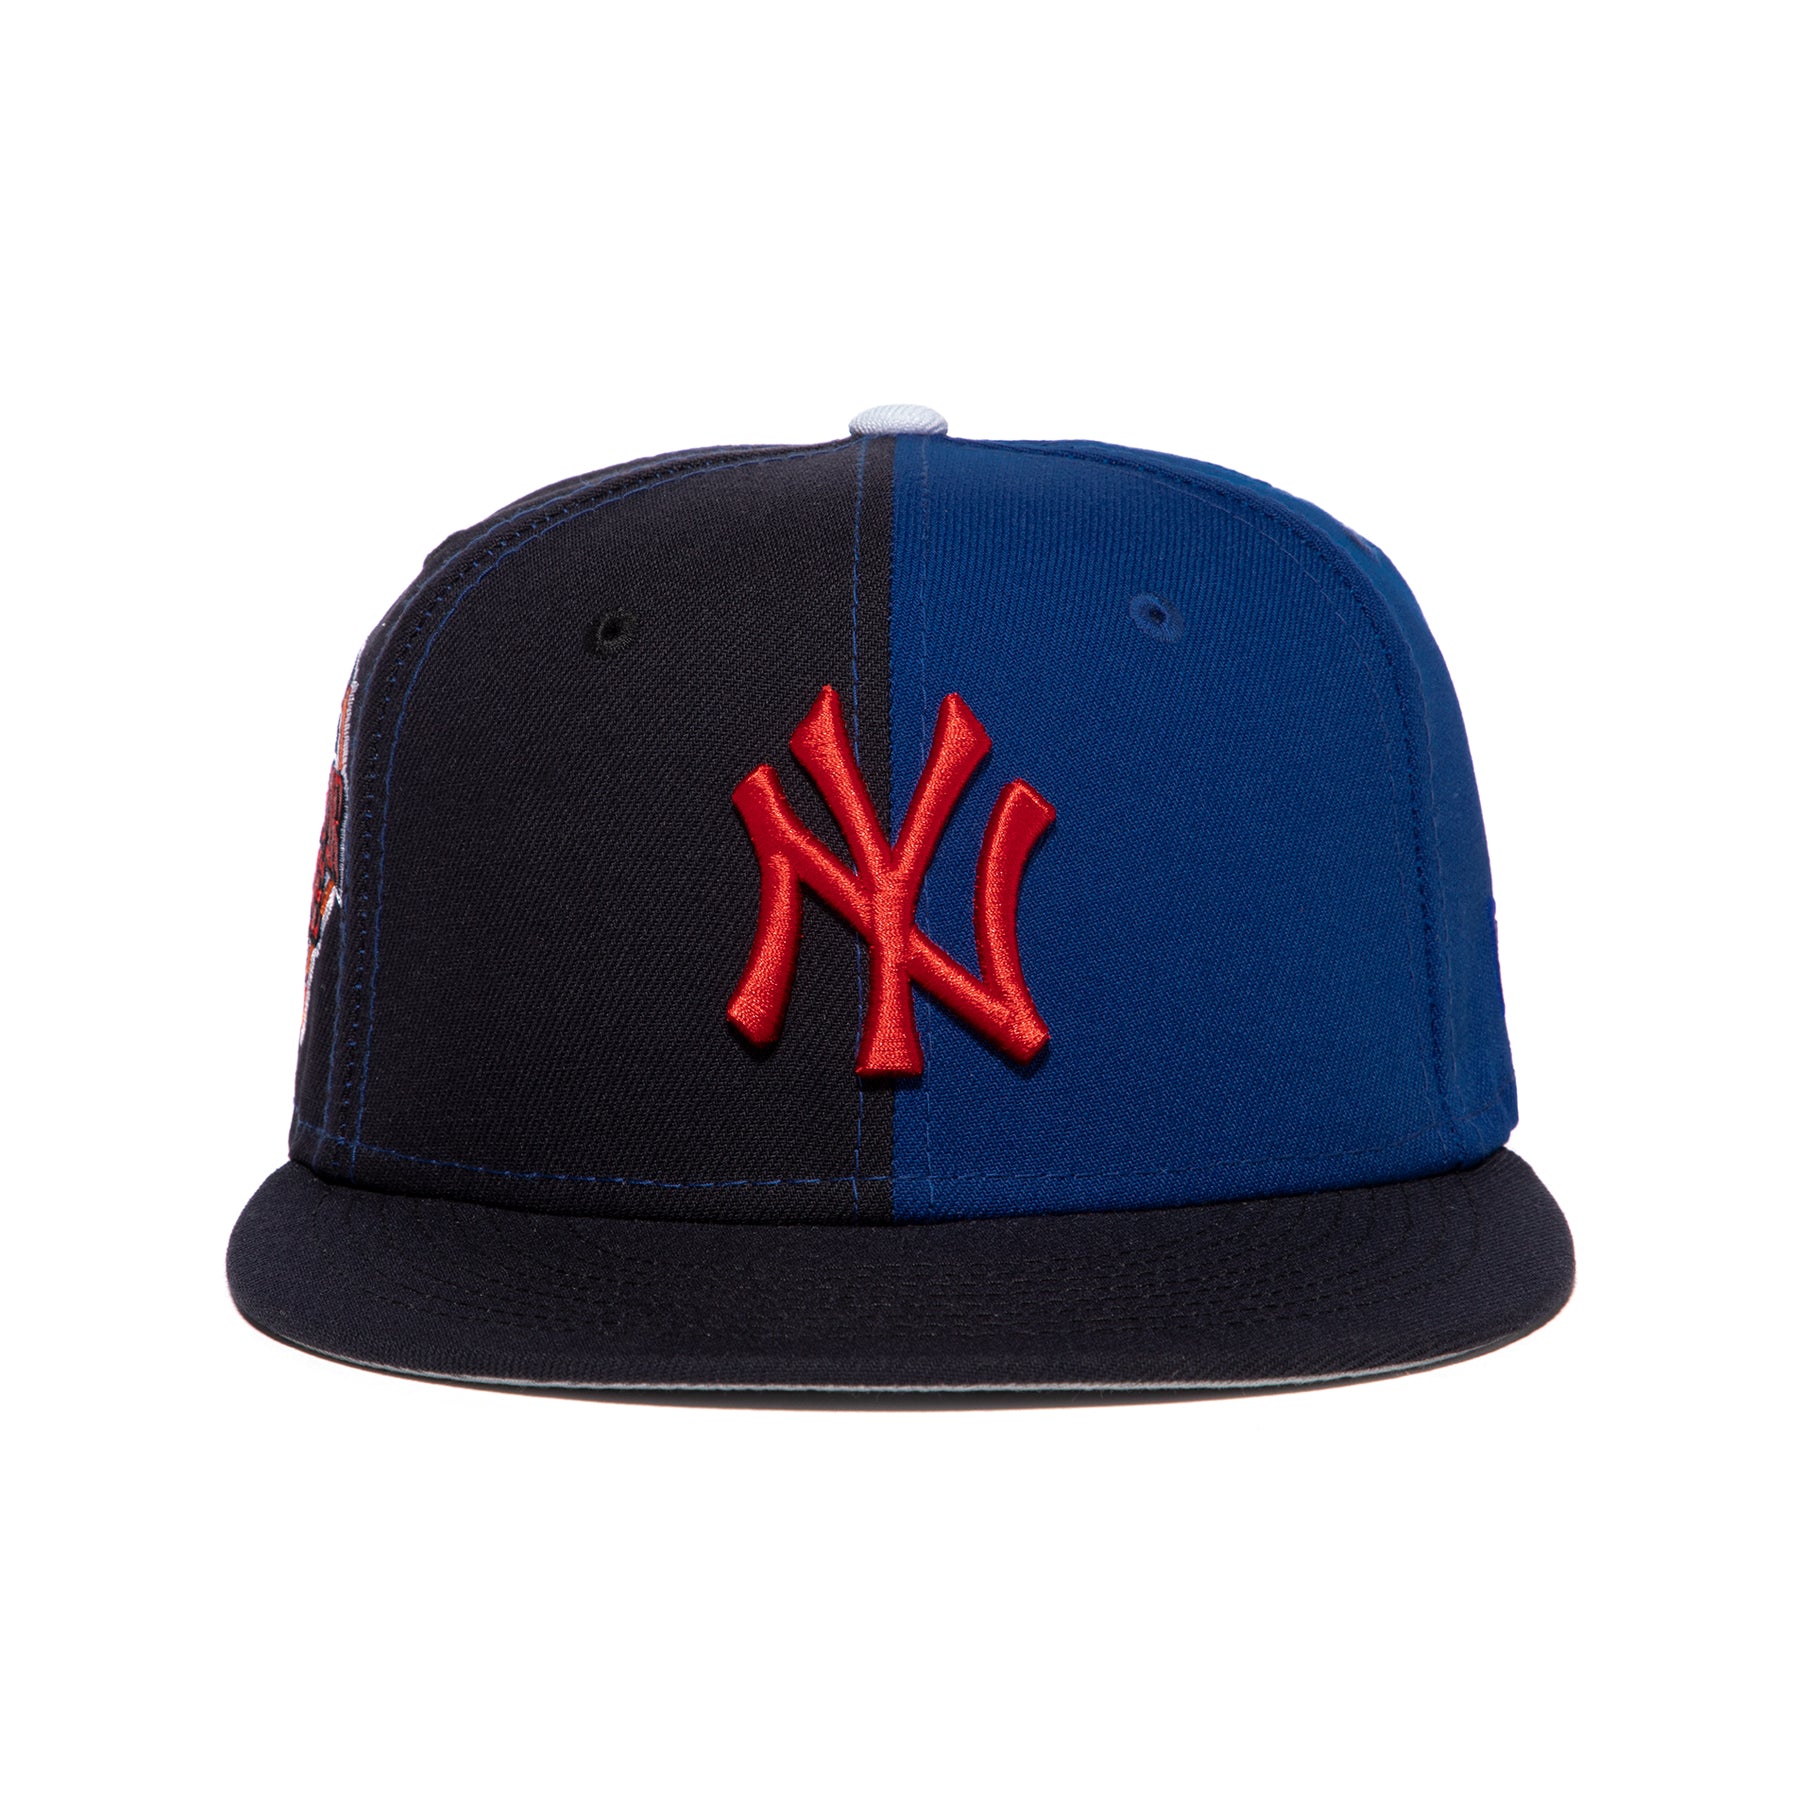 New York Yankees New Era 59FIFTY Fitted Hat - Royal